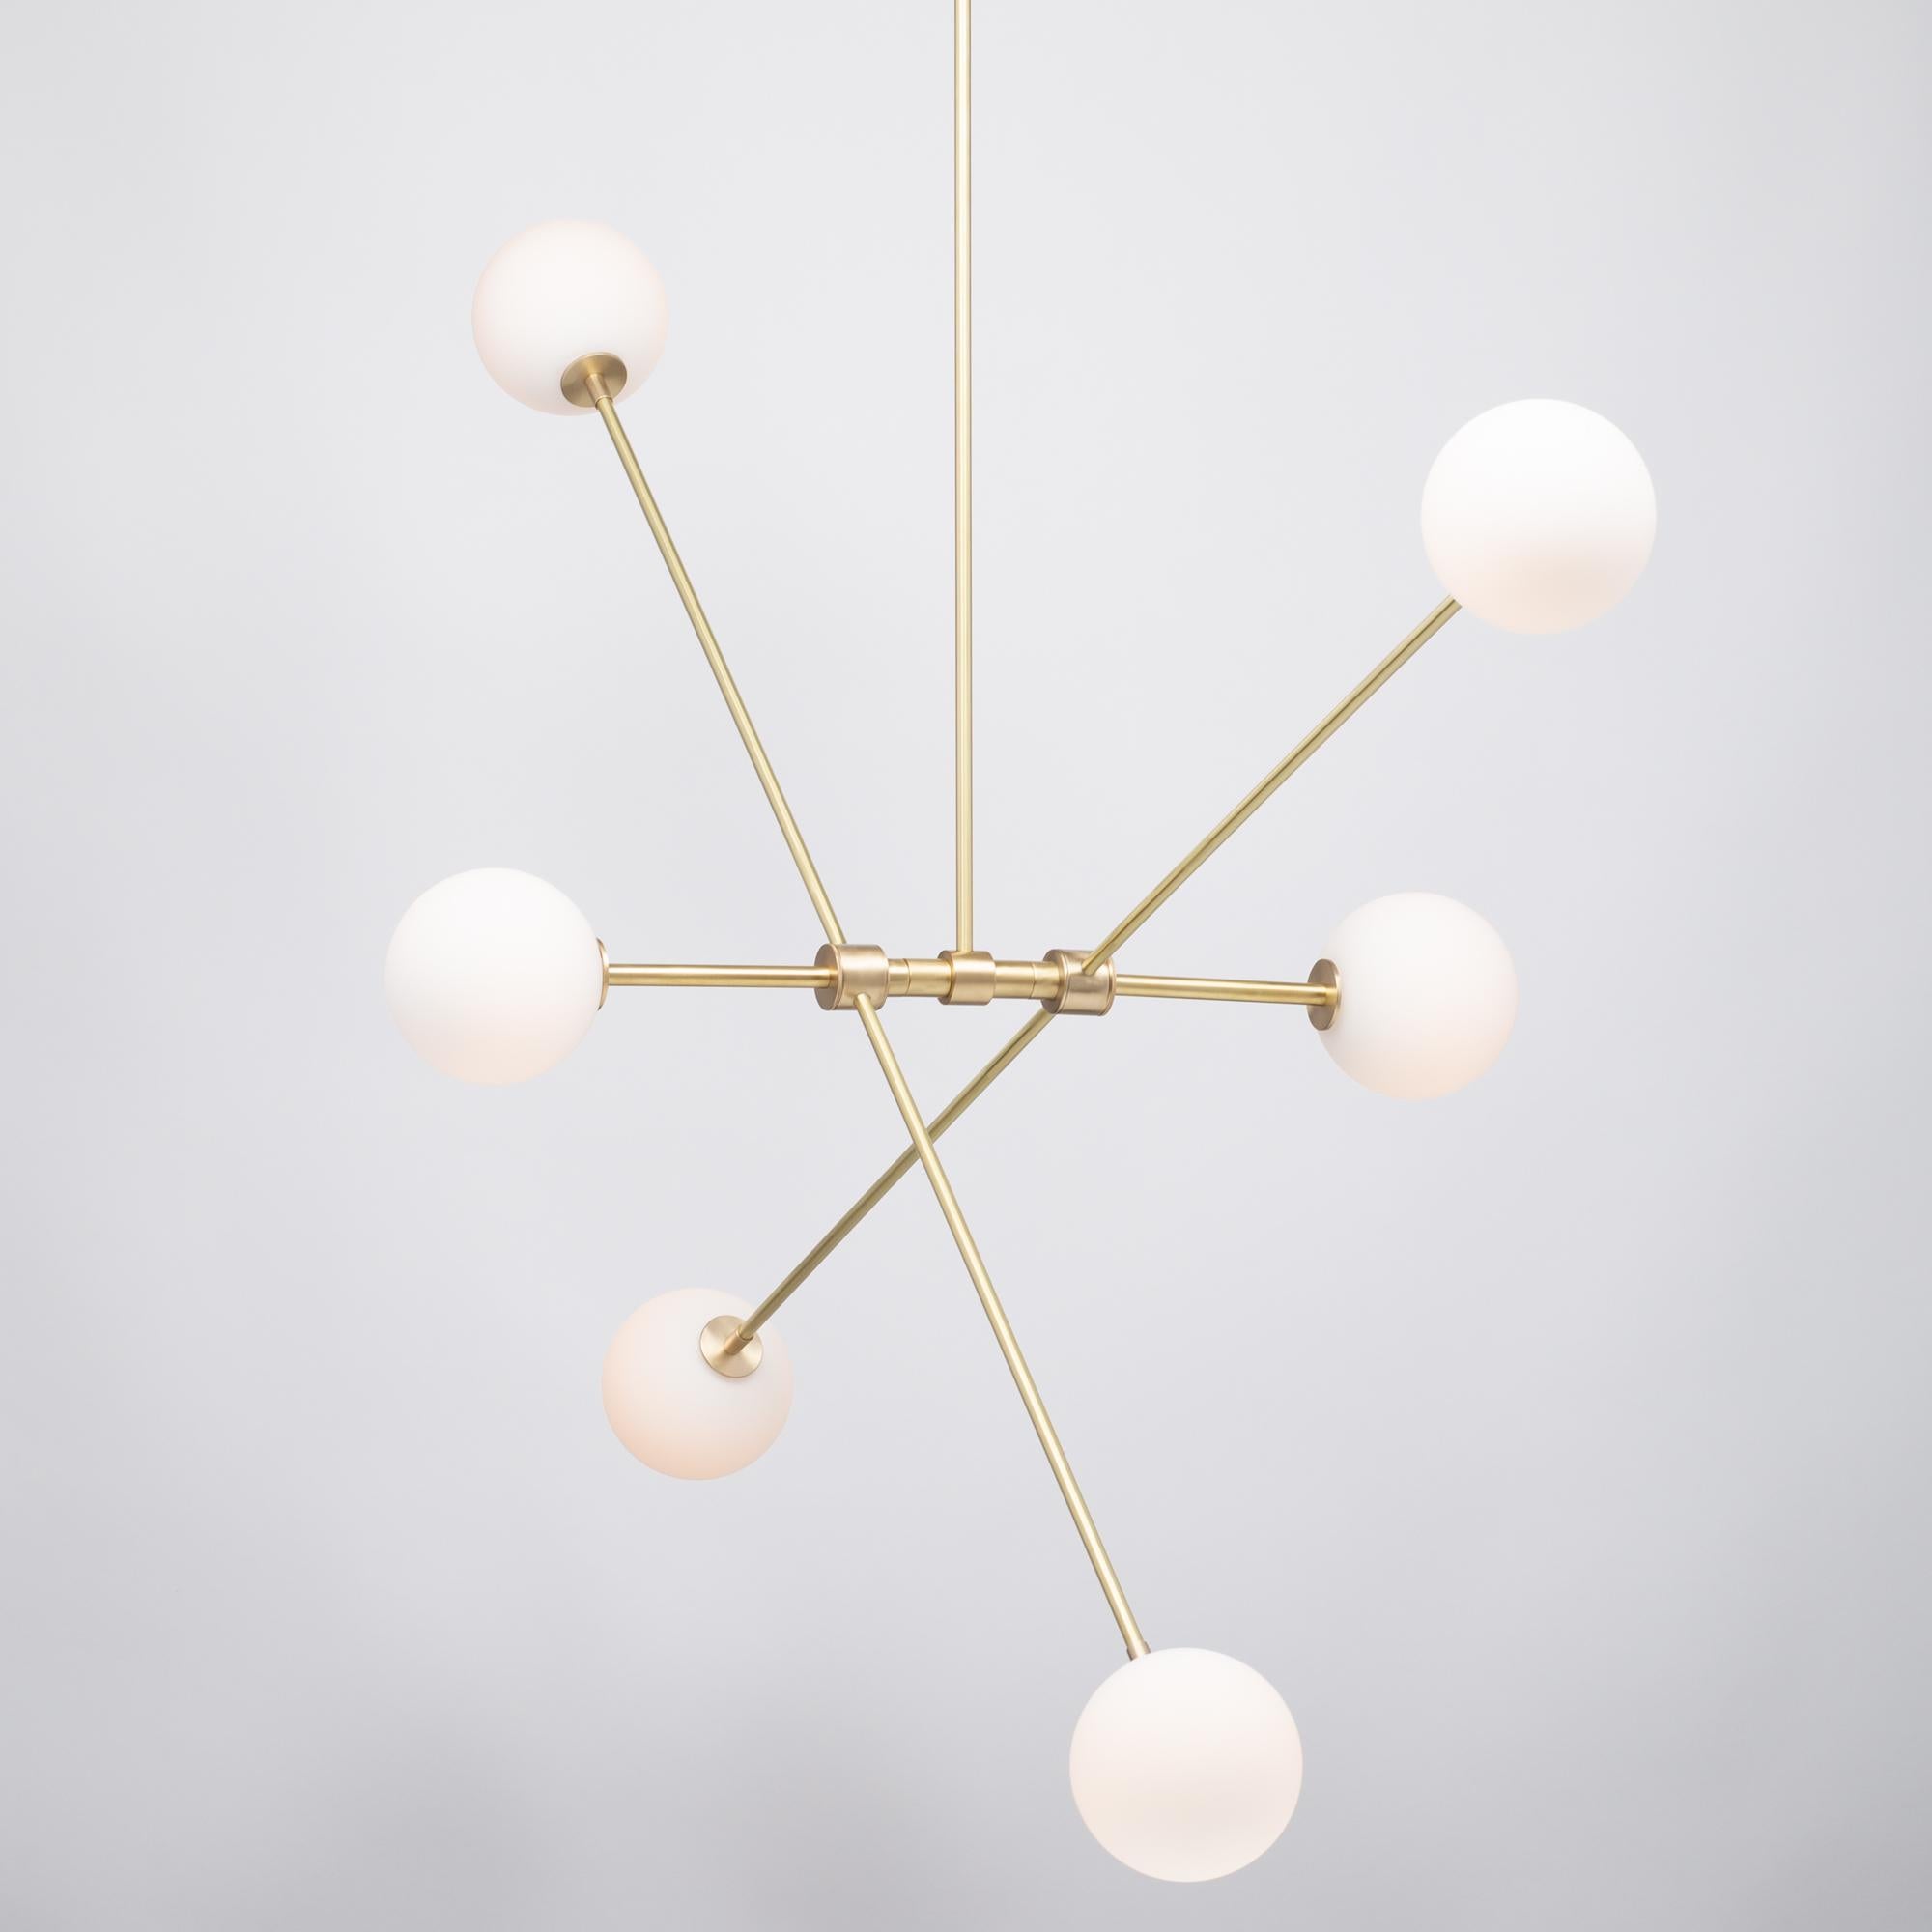 Six Matte Sphere Articulating Satin Brass Pendant
Solid brass, Satin finish. Lacquered.
G9 4.5W 97CRI Dimmable Tala bulbs included.
2700 Lumens total dimmable output.
Flush mount ceiling plate or surface mount.
Custom suspension drop height.
Matte